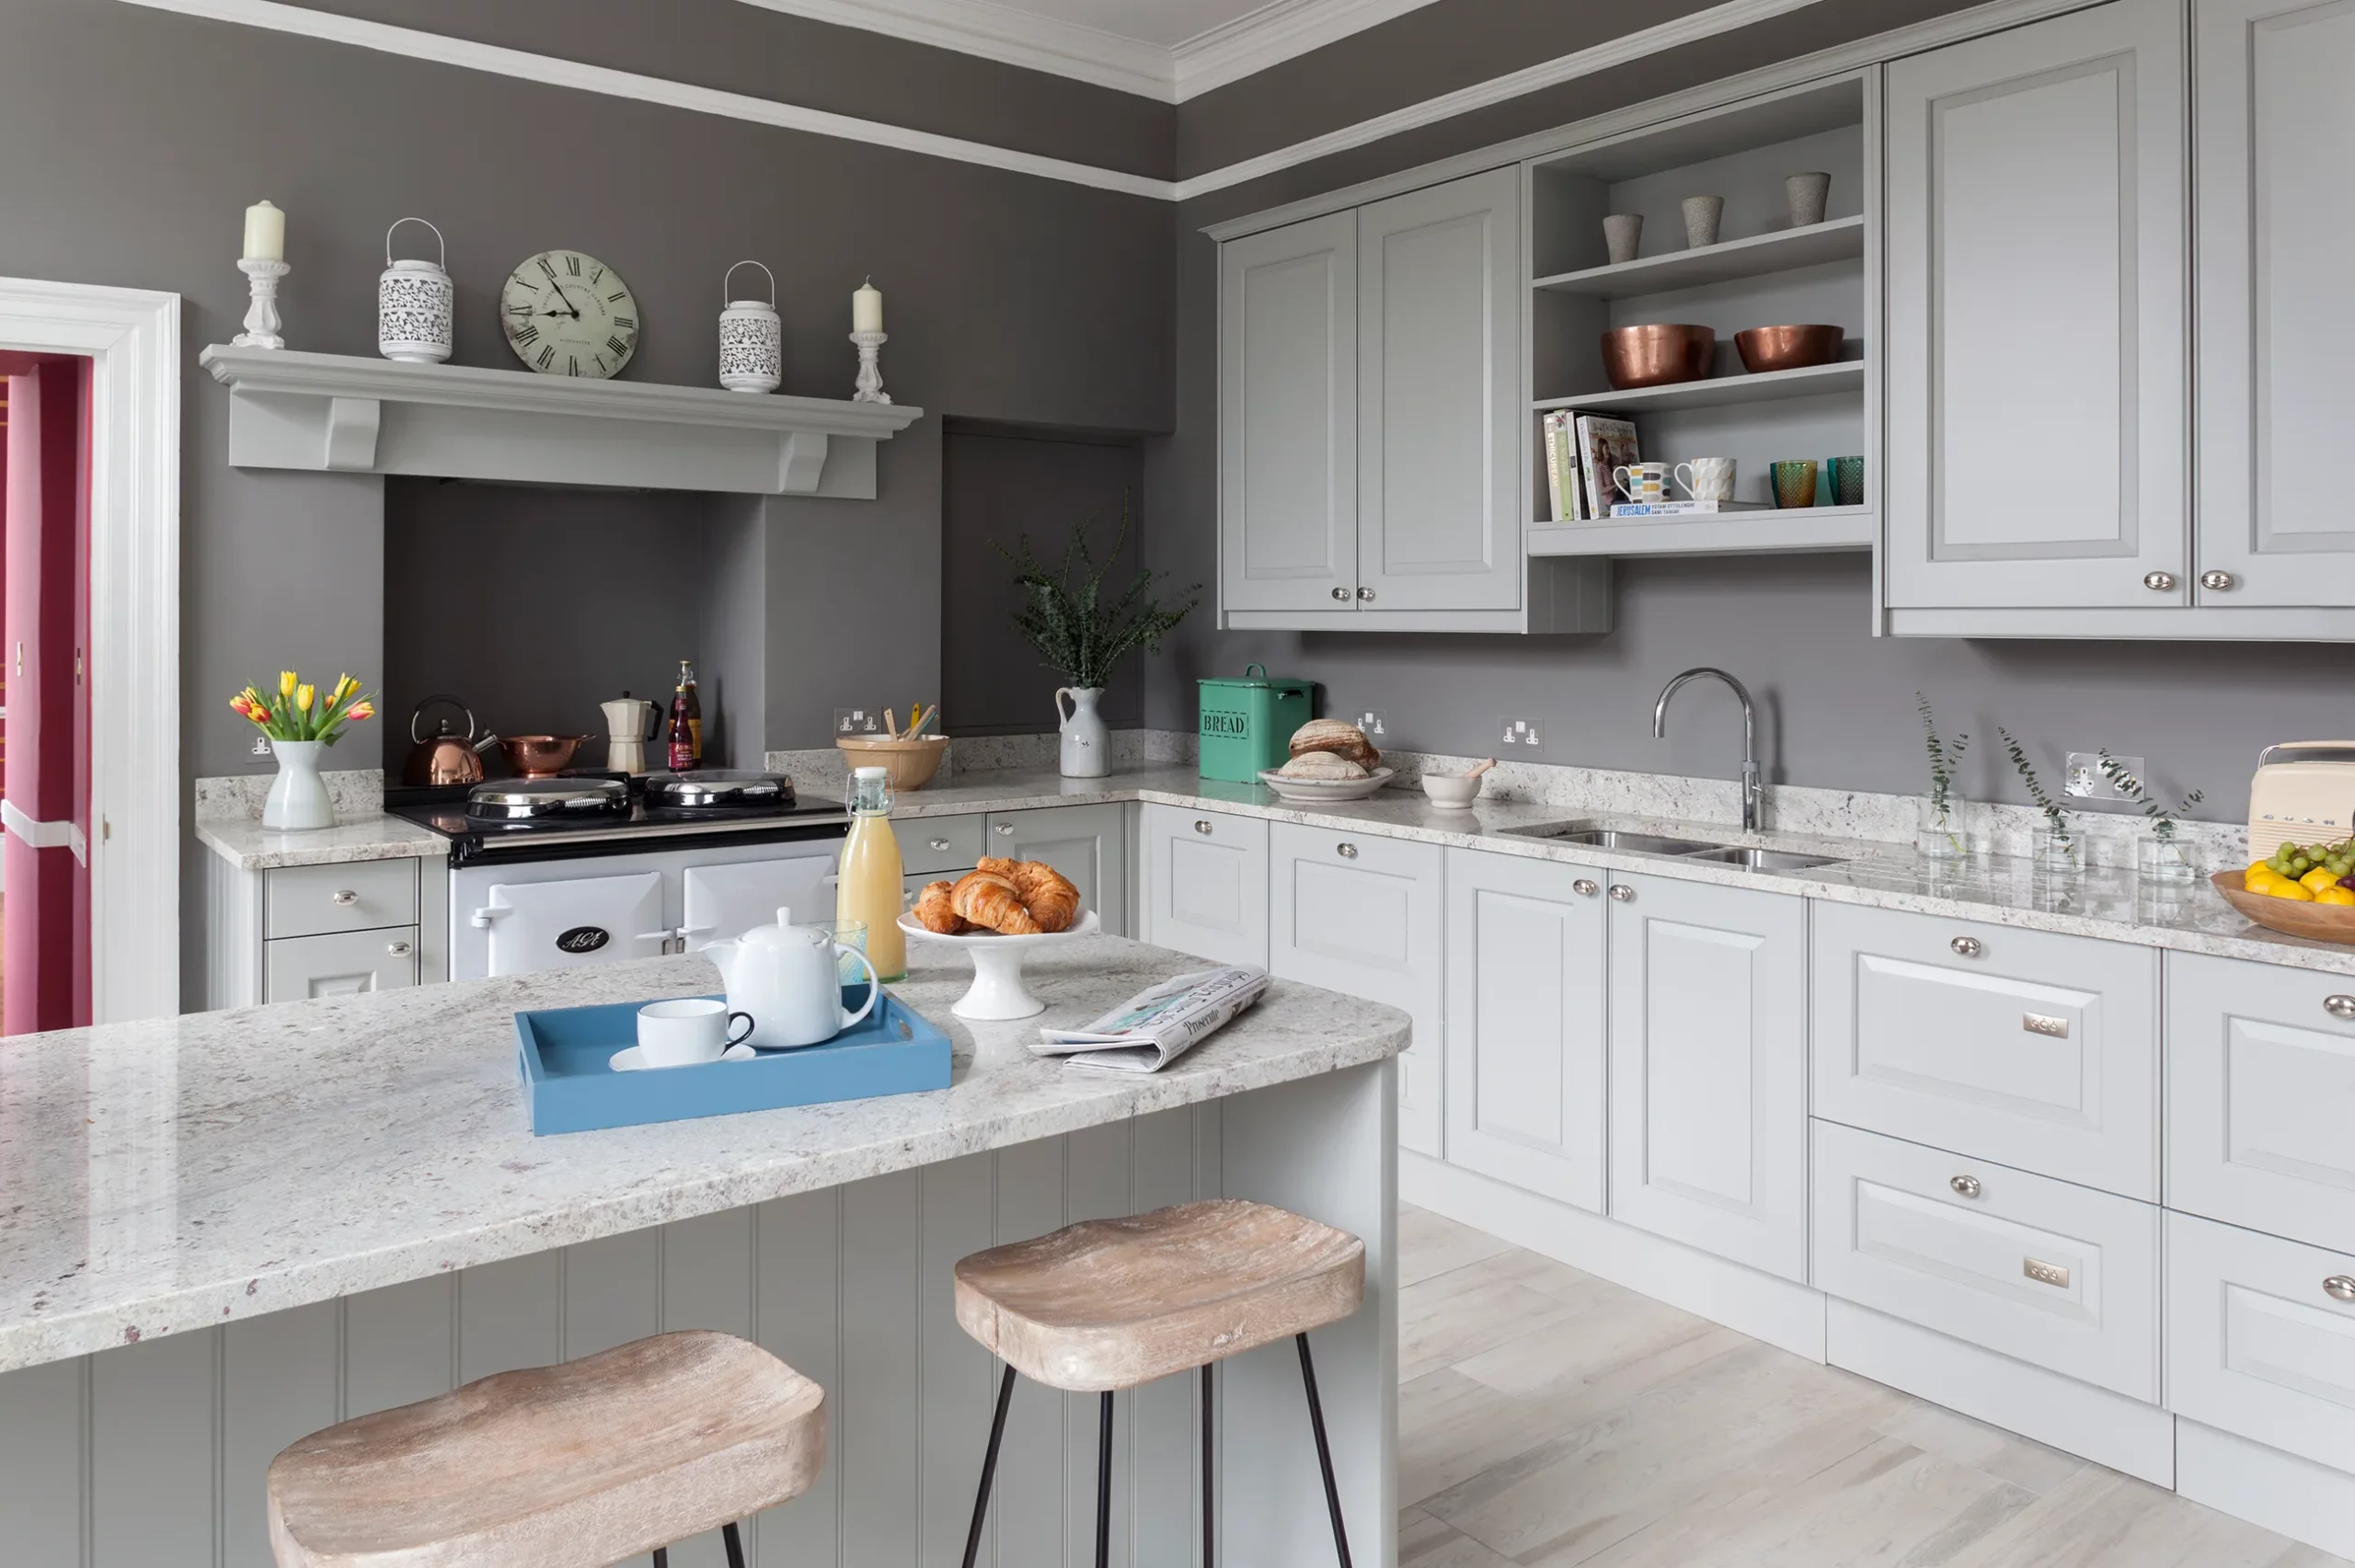 Sophisticated Kitchen Finished in Grey for a Modern Look